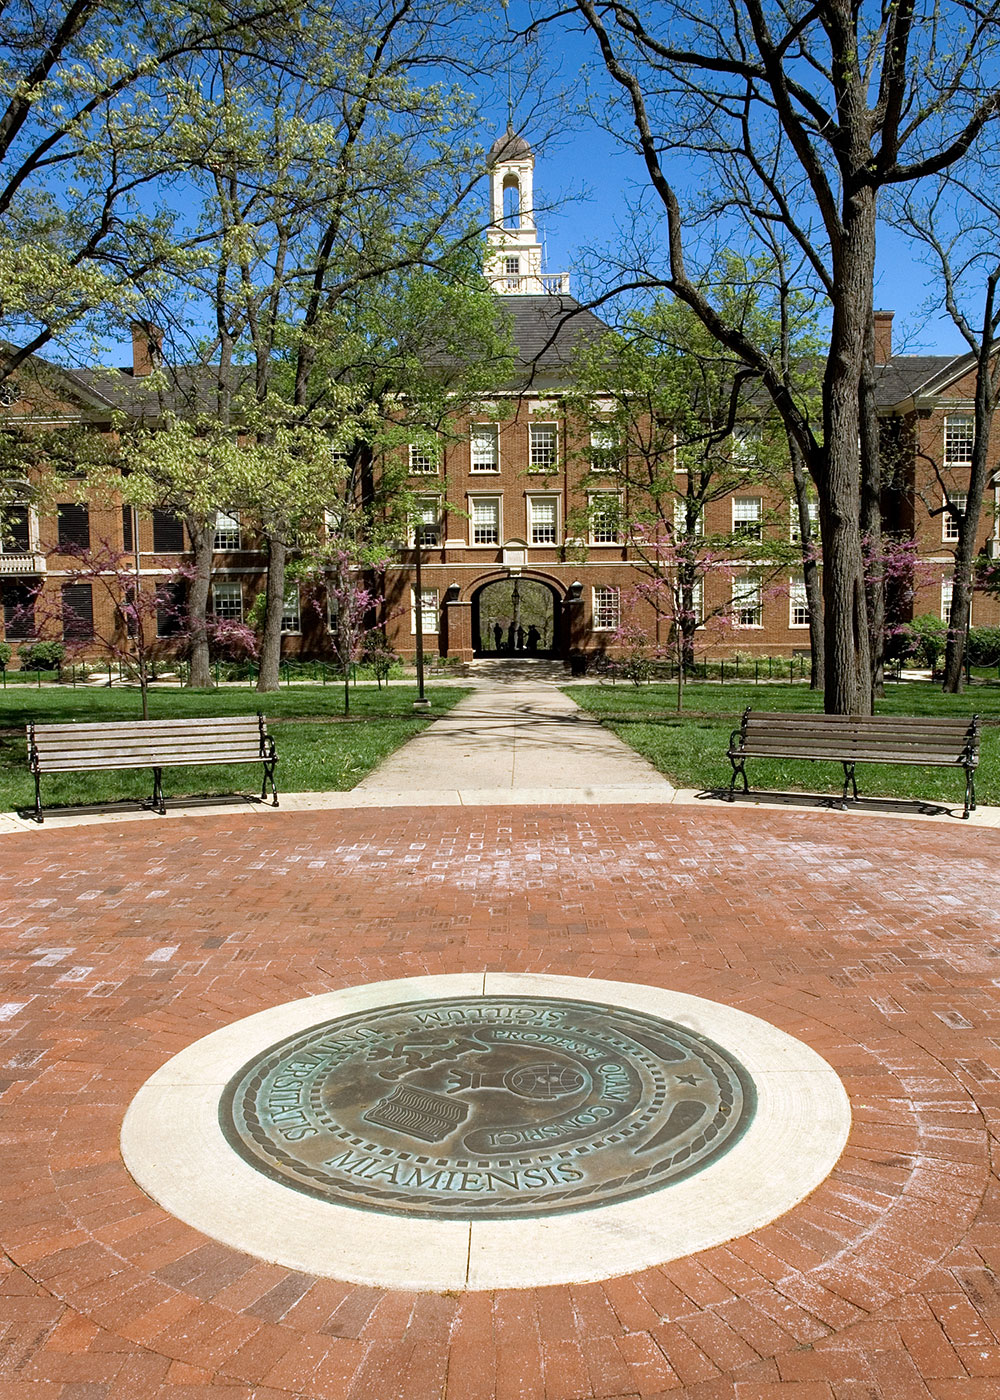 The Miami University bronze seal located in the center of campus across from Upham Hall